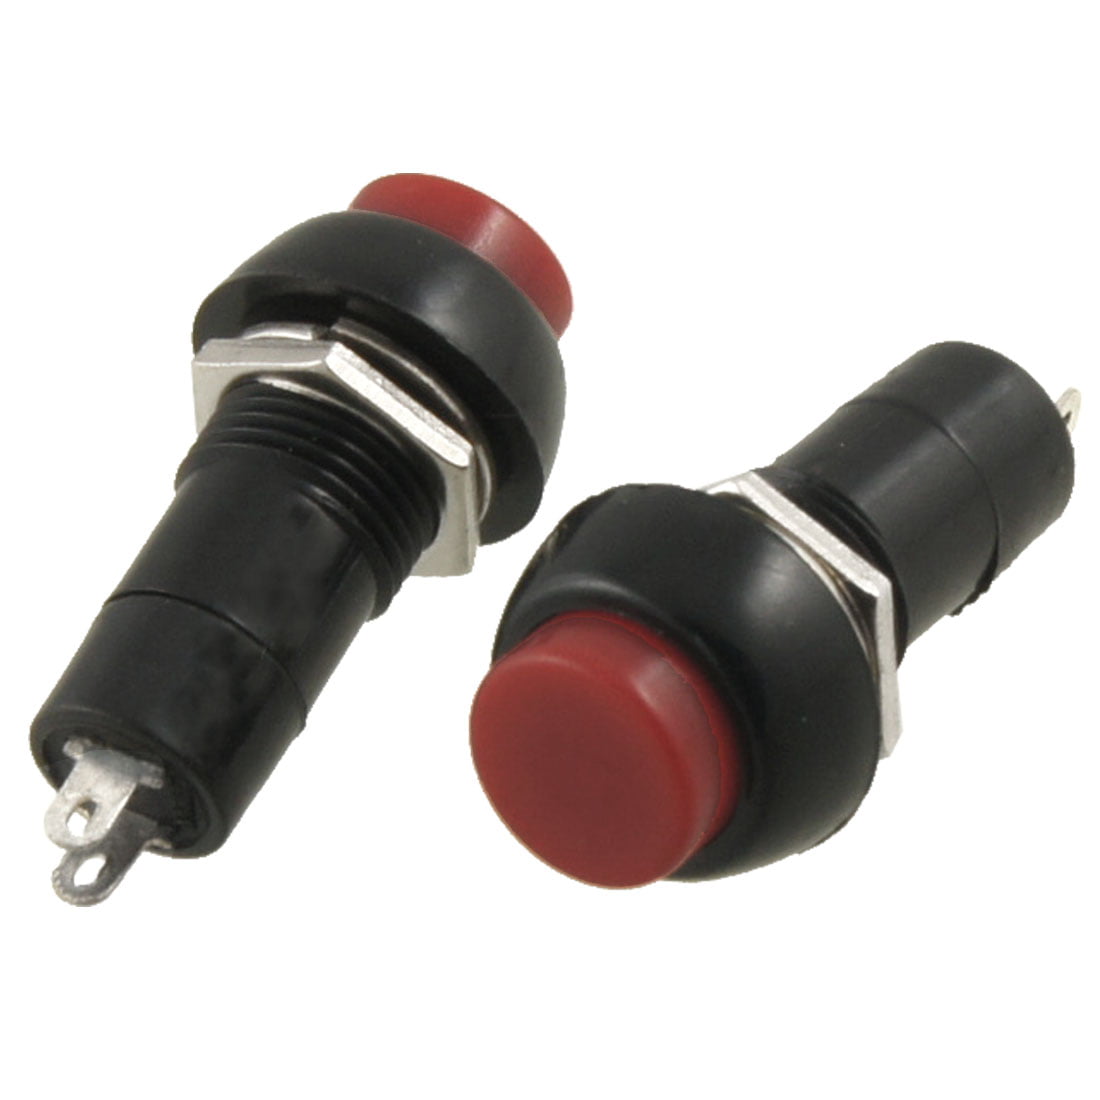 SPST Red Push Button Switch Pack of 2  PB01R-2 Min 